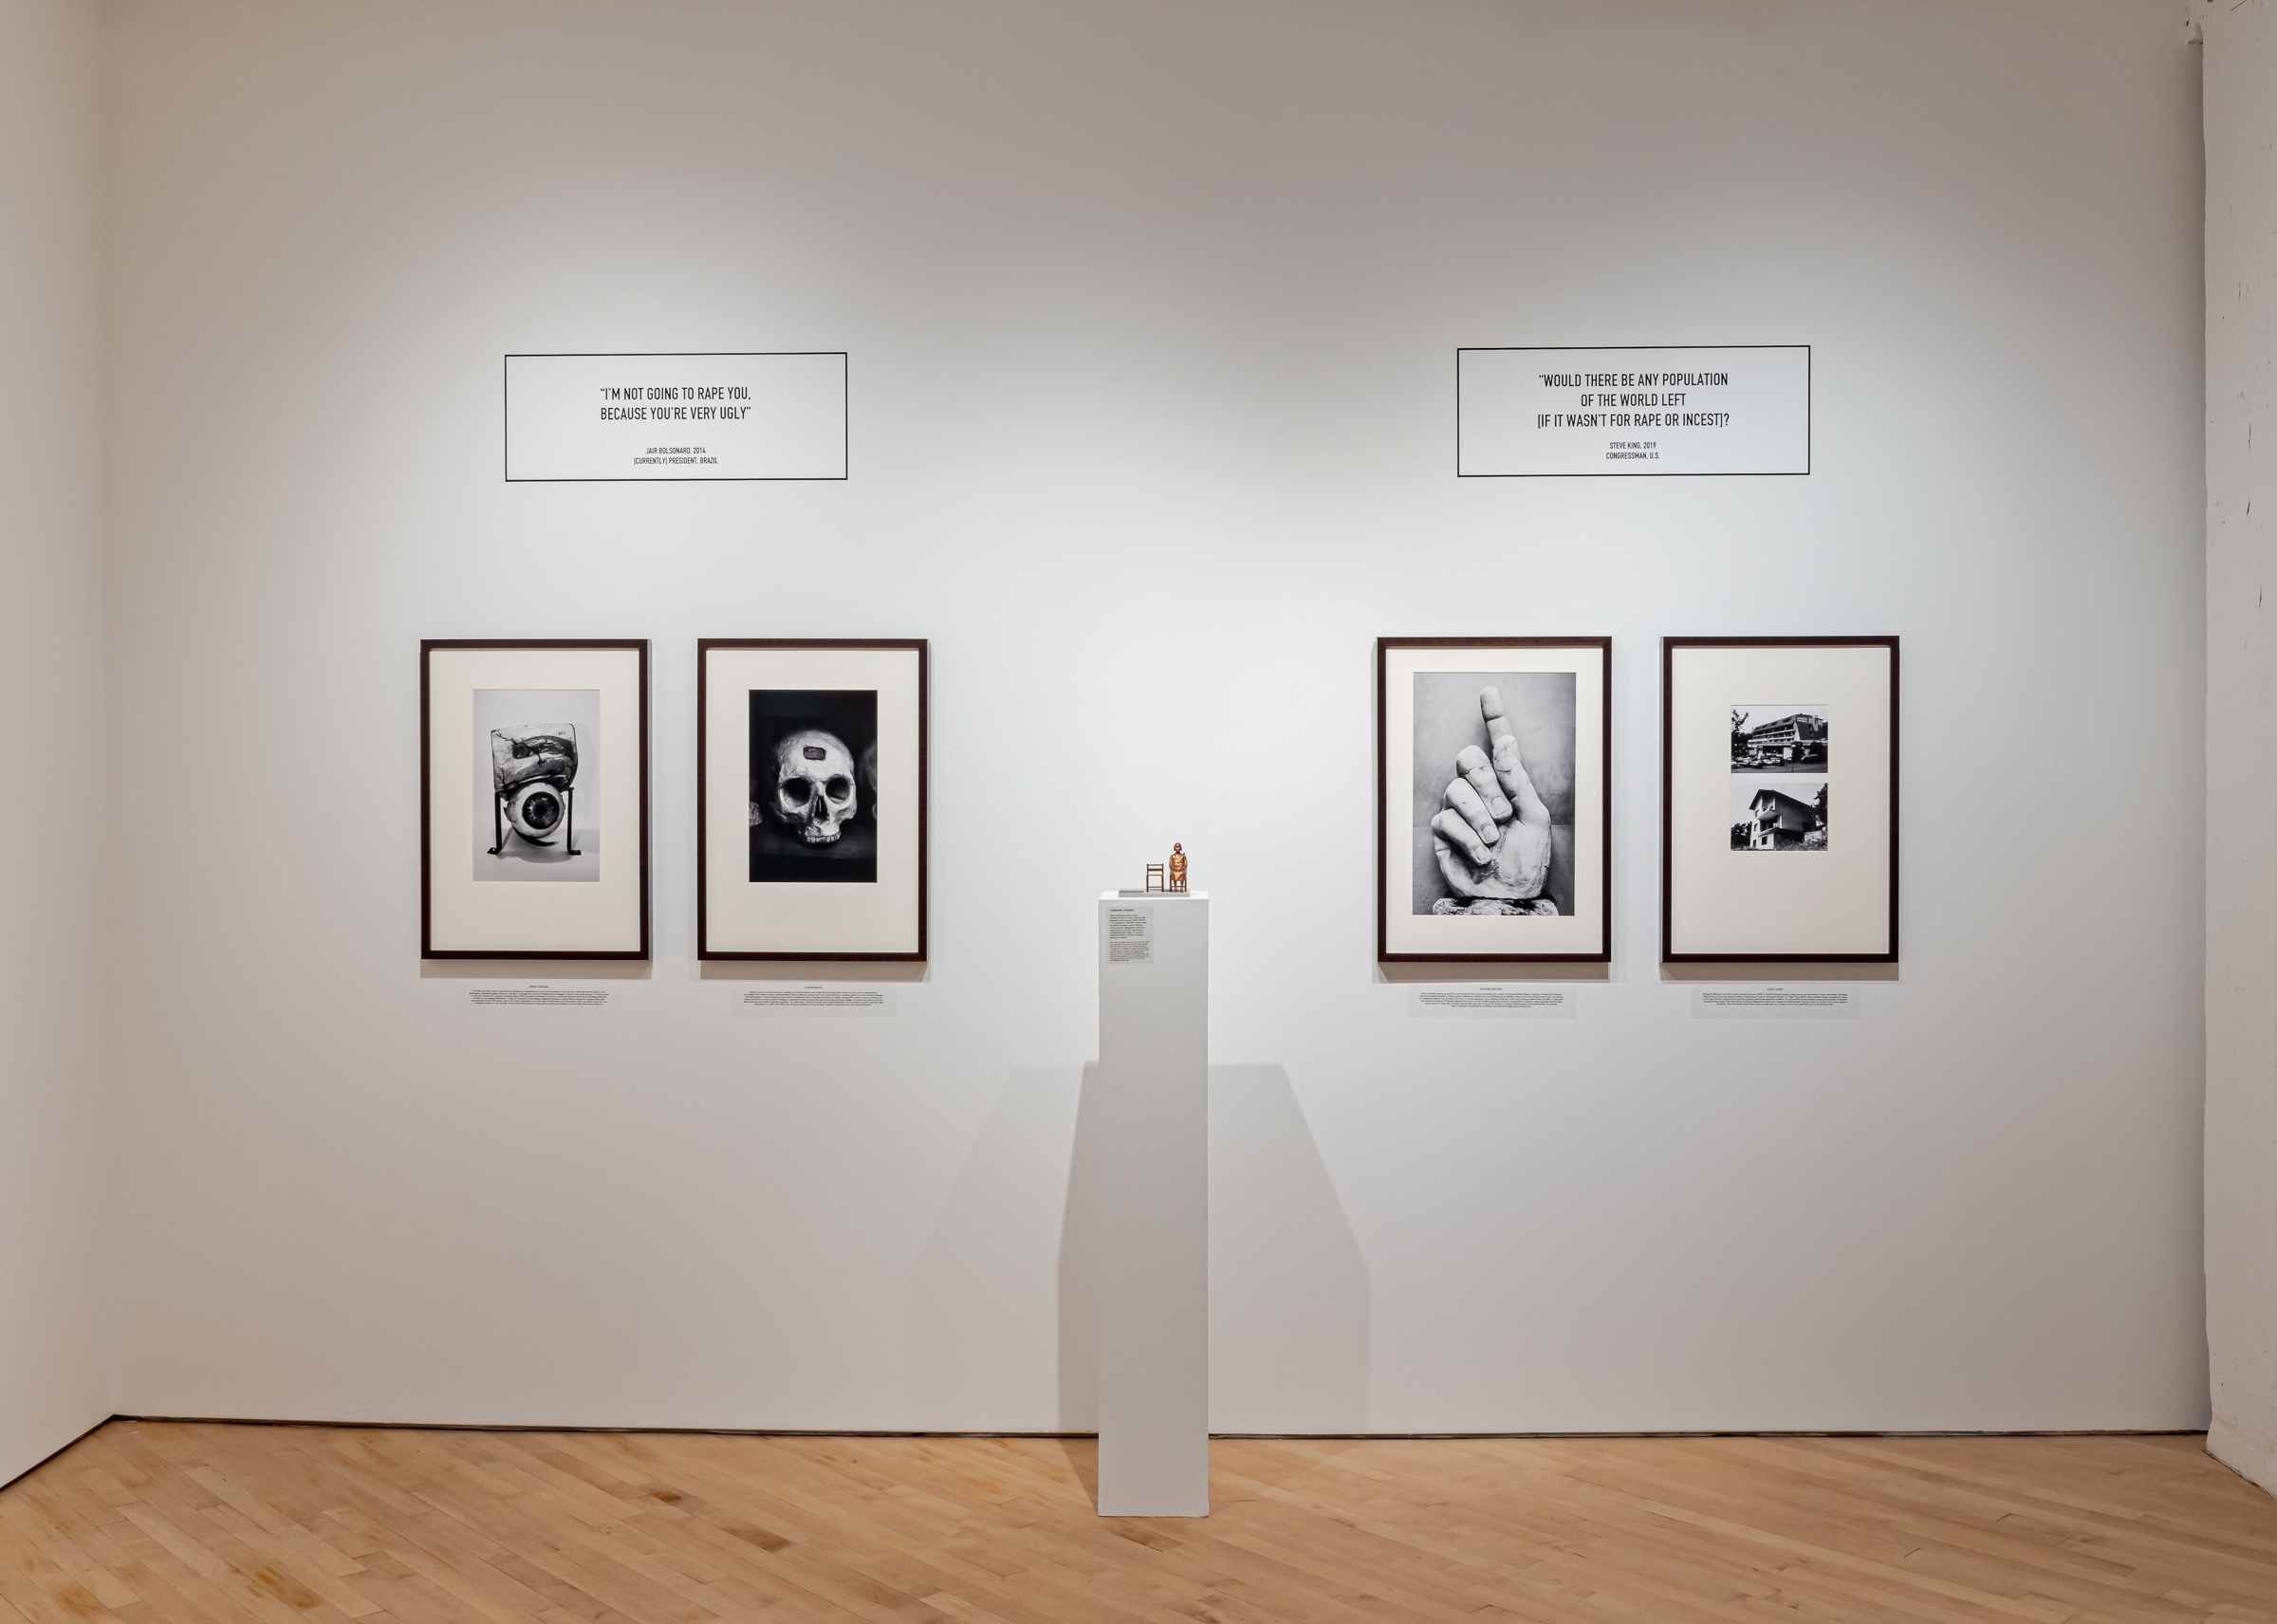     Laia Abril, A History of Misogyny Chapter Two: On Rape, installation view, CONTACT Gallery, 2021. Courtesy of the artist, Galerie Les Filles du Calvaire, and Scotiabank CONTACT Photography Festival. Photo: Toni Hafkenscheid

